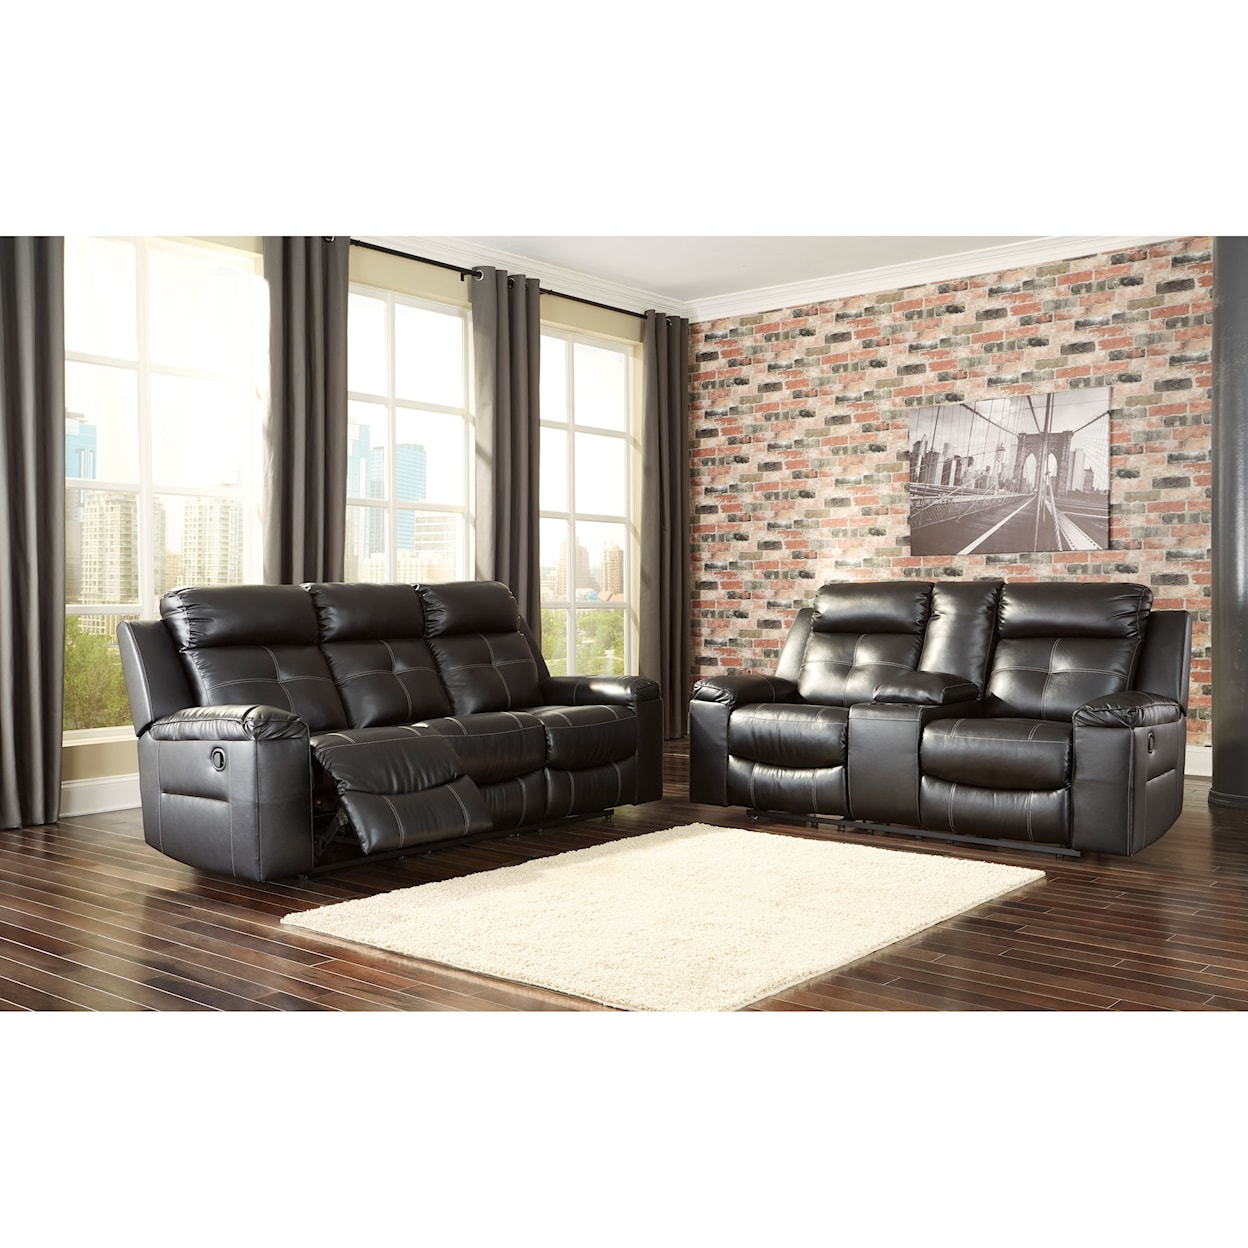 Signature Design by Ashley Furniture Kempten Reclining Living Room Group